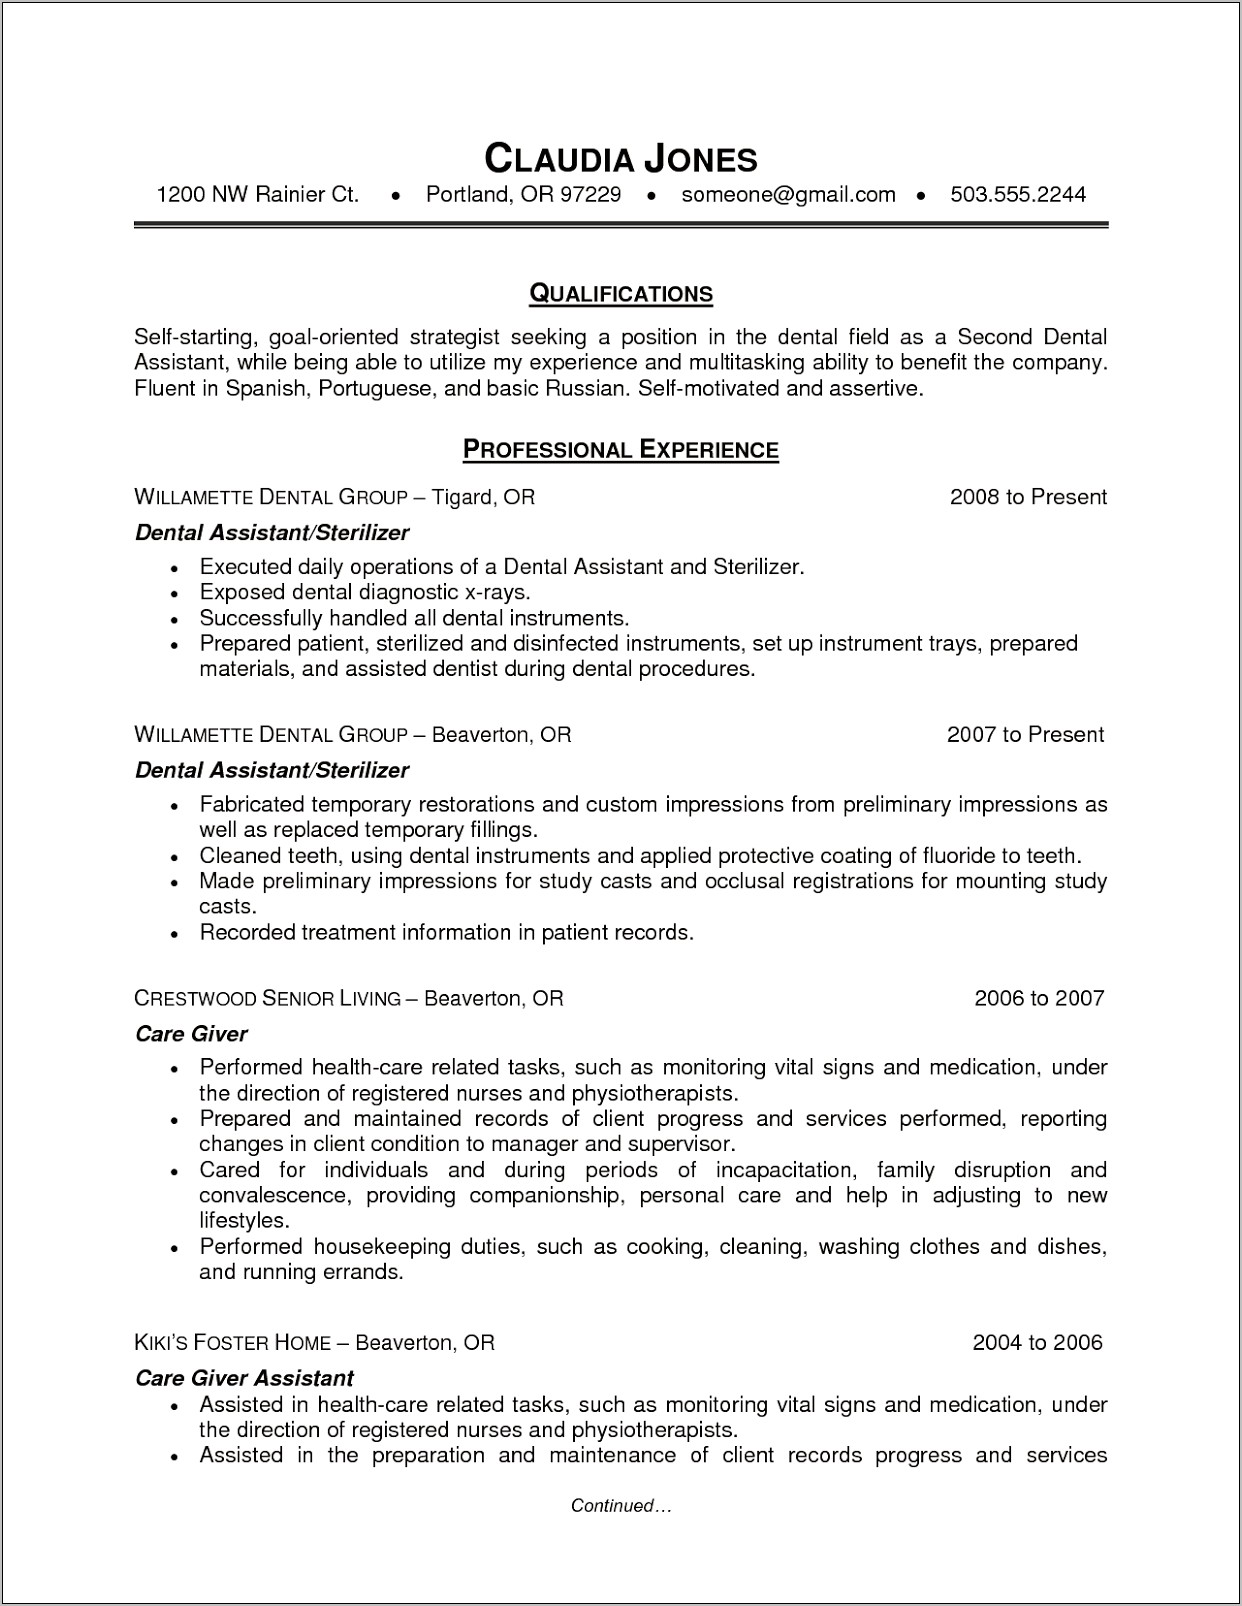 Resume Cover Letter For Dental Assistant No Experience